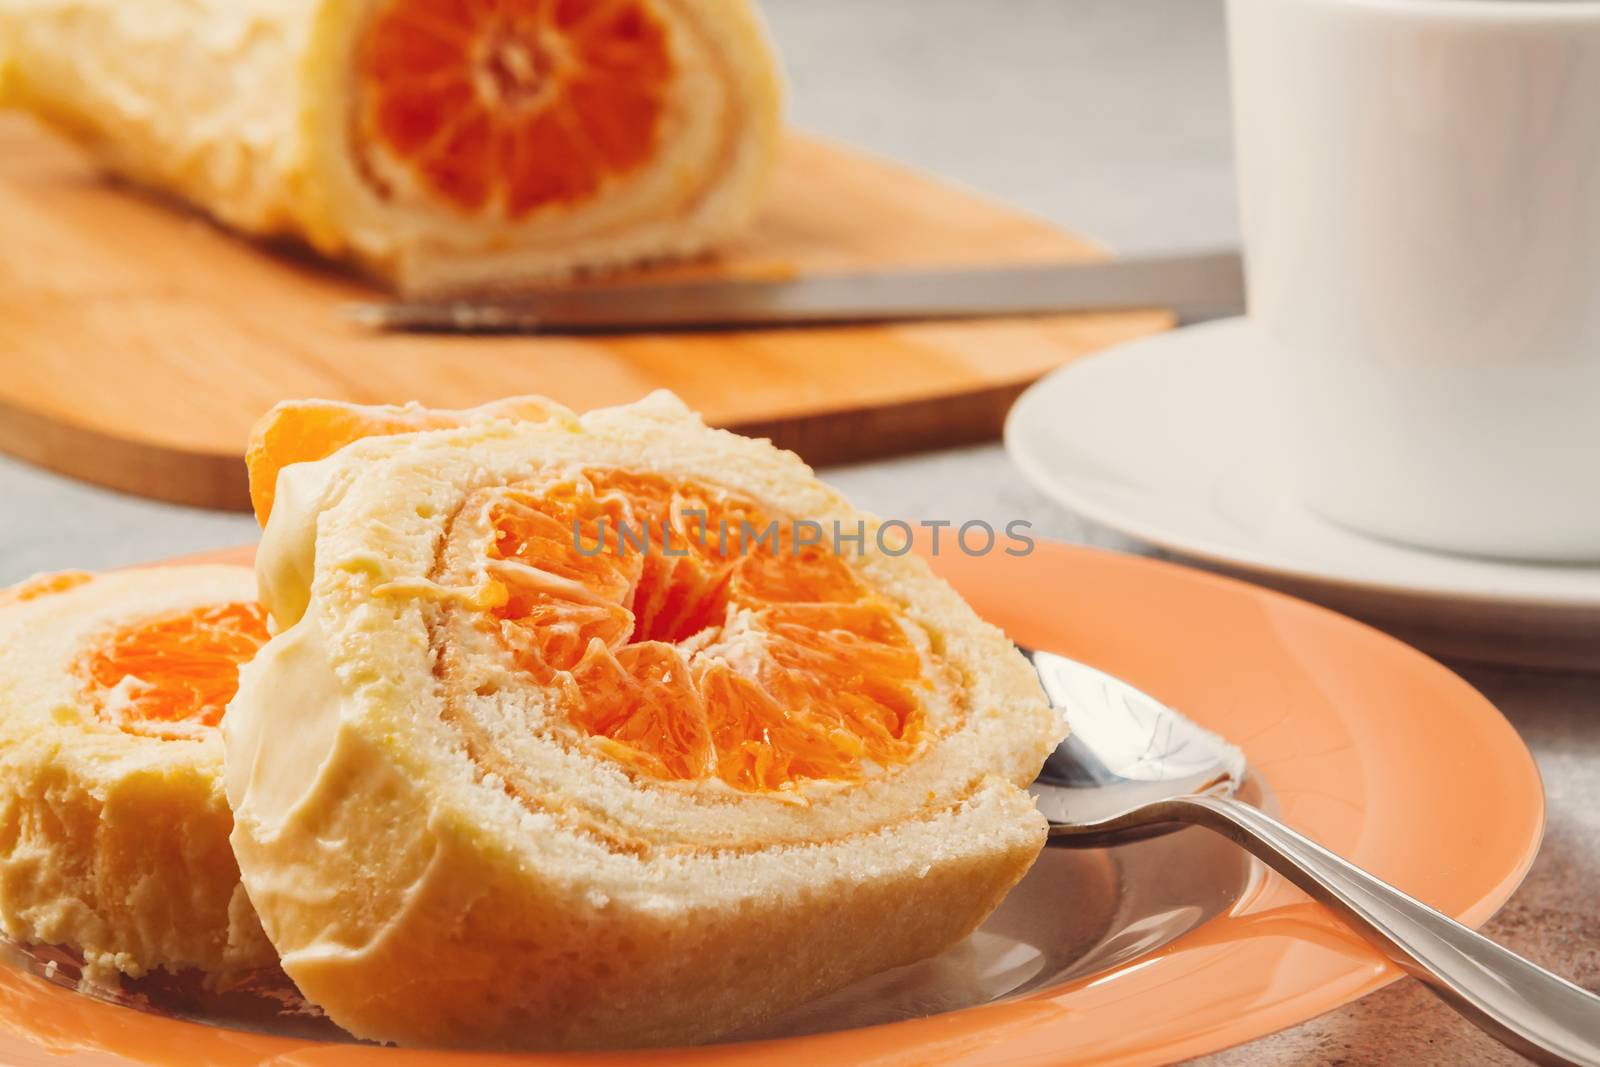 Sweet roll with whipped cream and tangerine filling and a cup of coffee.